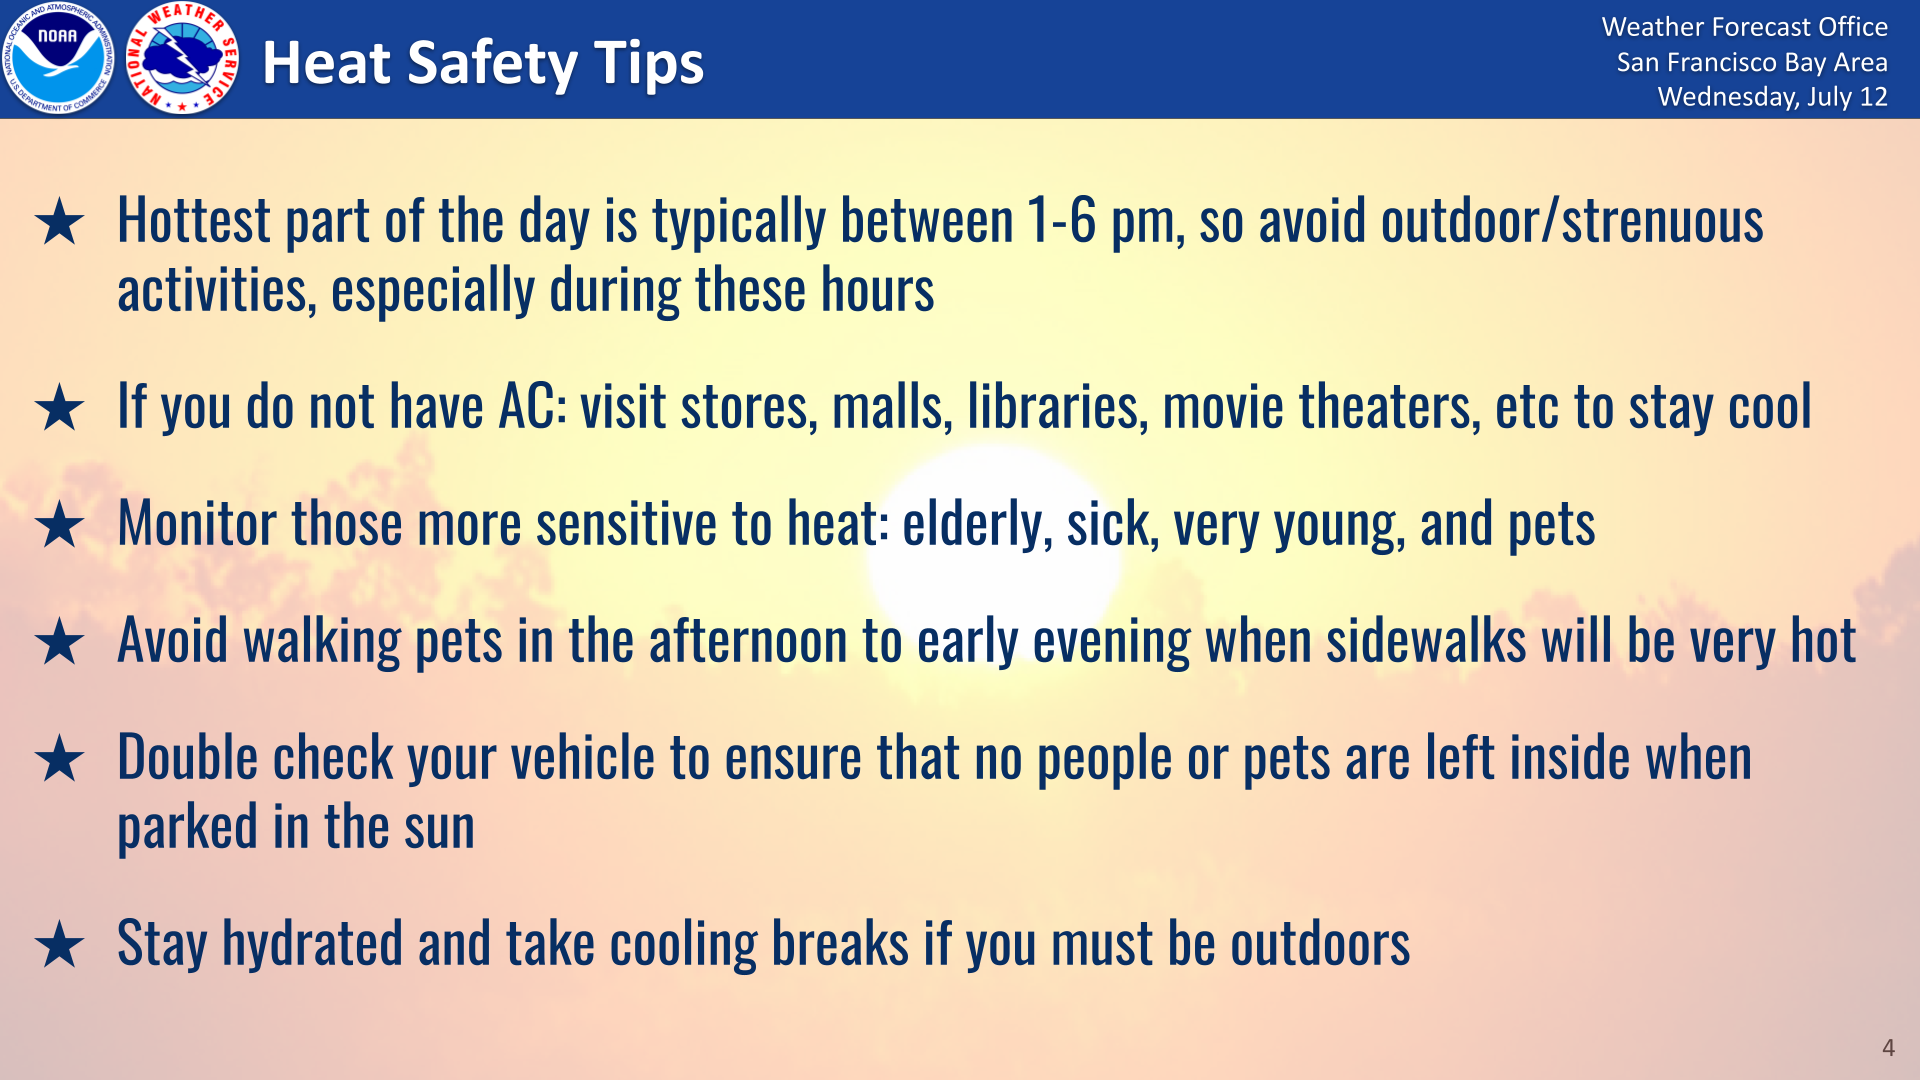 Heat Safety Tips from National Weather Service Bay Area